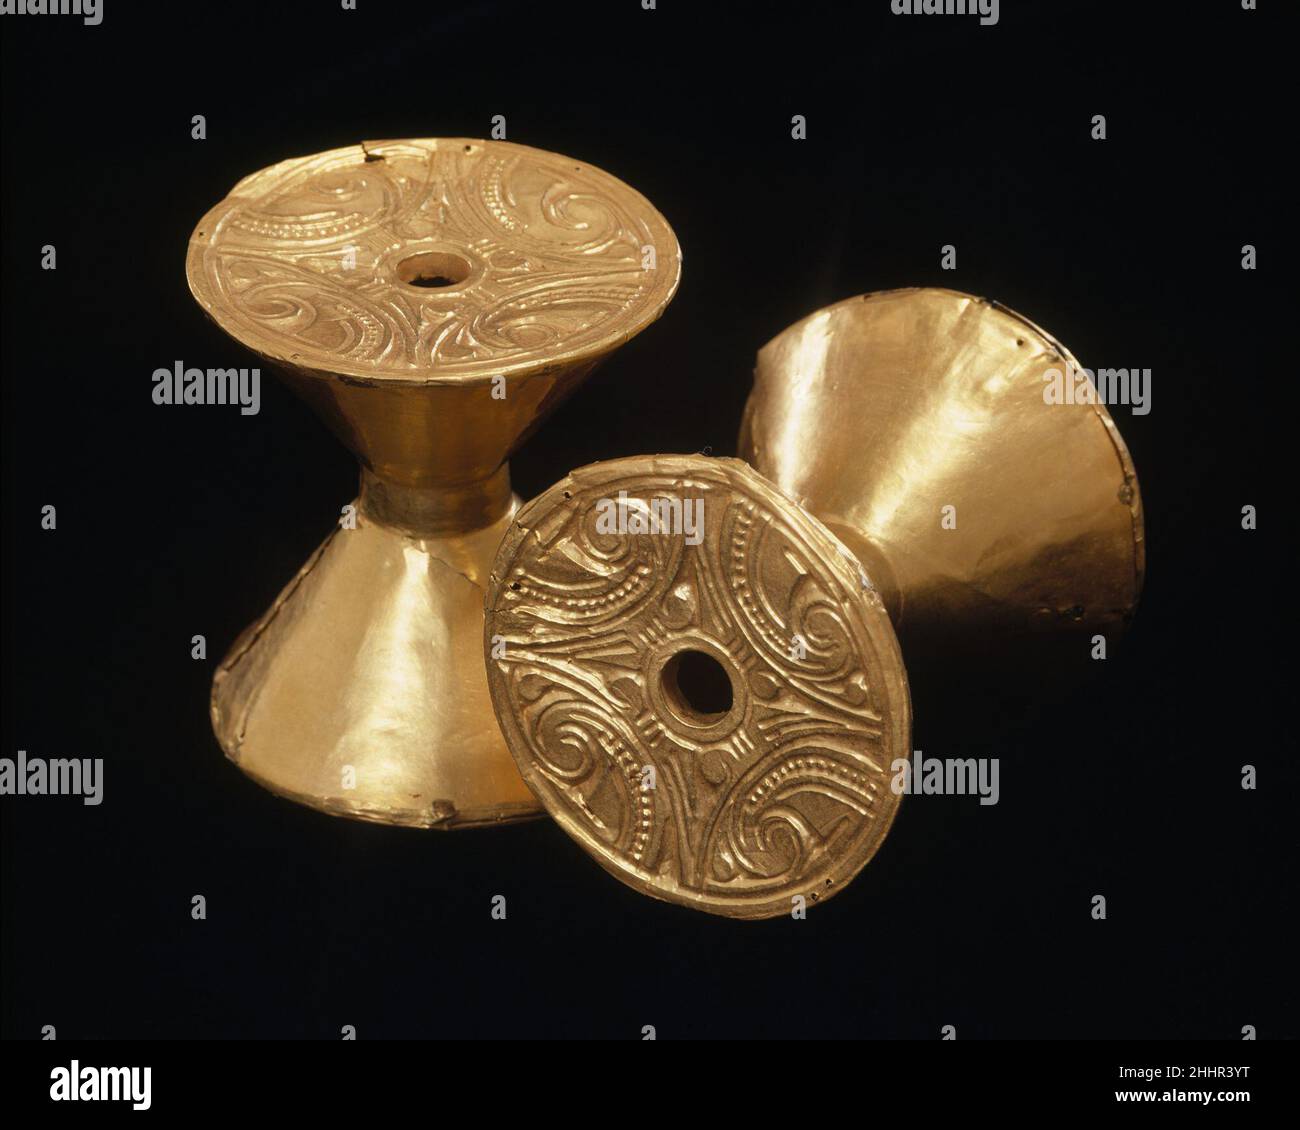 Pair of Ear Spools 100 B.C.–A.D. 800 Calima-Yotoco Calima leaders of the Yotoco period in the Cauca Valley region of southwest Colombia wore resplendent regalia in life and in death. These included diadems, pectorals, nose ornaments, and elaborate, multicomponent ear ornaments terminating in large, circular pendants. Biconical or spool-shaped objects with decorated ends such as these were inserted through the earlobes, and large concave disks gold would be suspended through an opening at the center of these with thin gold wires. Made of lightweight hammered gold sheet, the biconical elements p Stock Photo